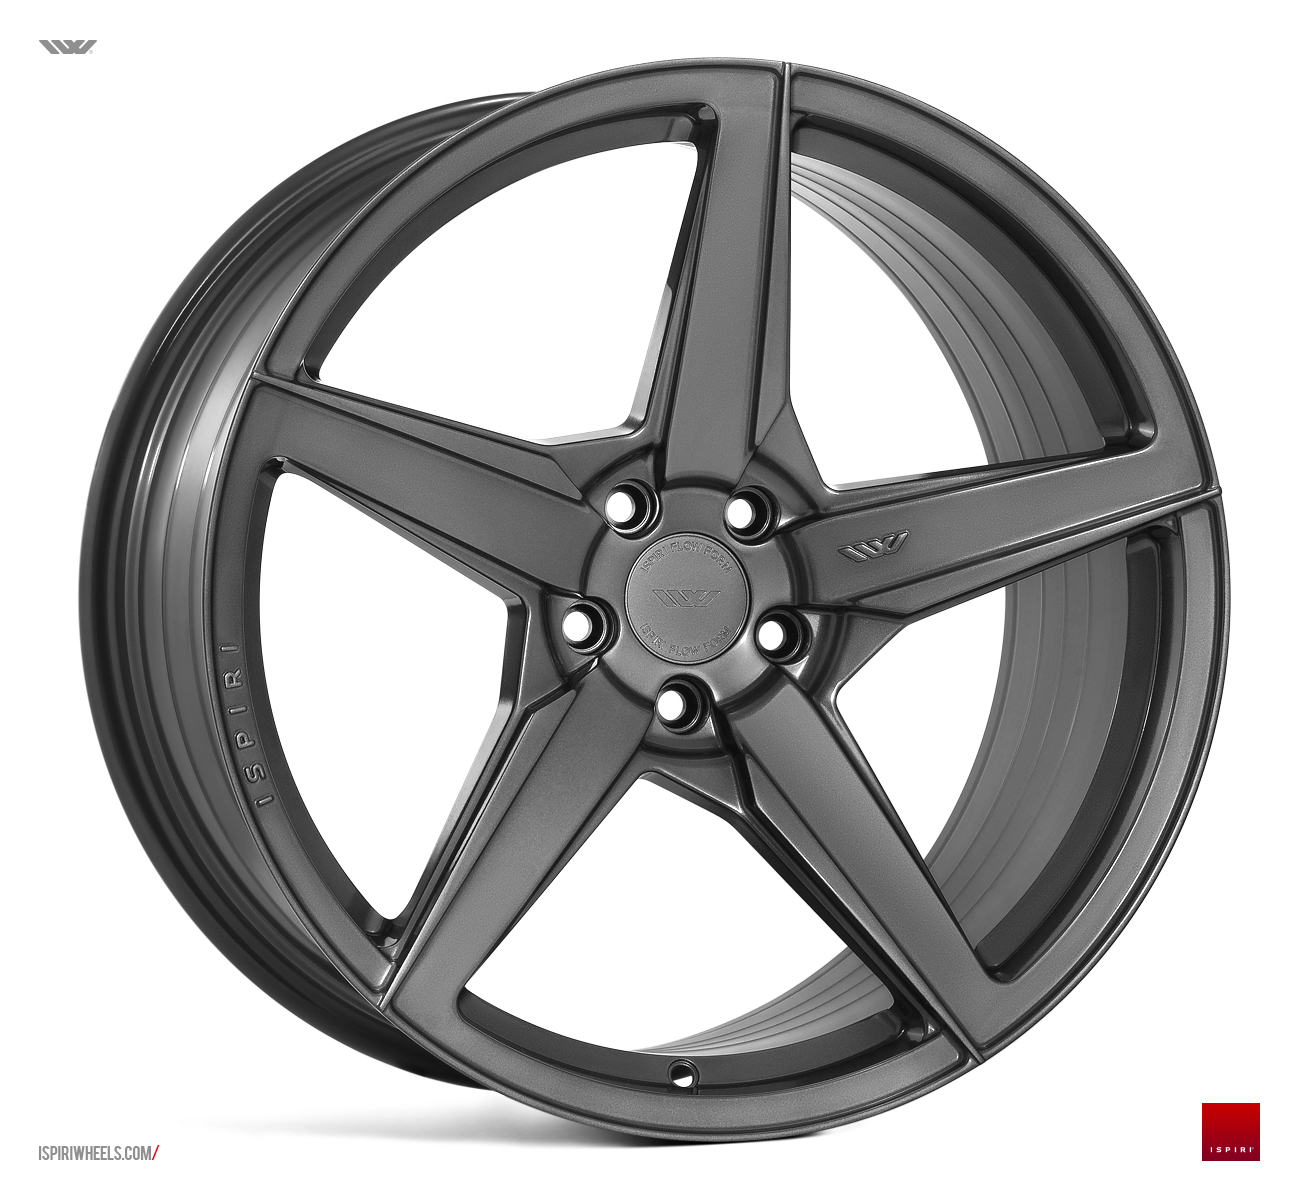 NEW 20" ISPIRI FFR5 5 SPOKE ALLOY WHEELS IN CARBON GRAPHITE WITH DEEP CONCAVE 10.5" REARS